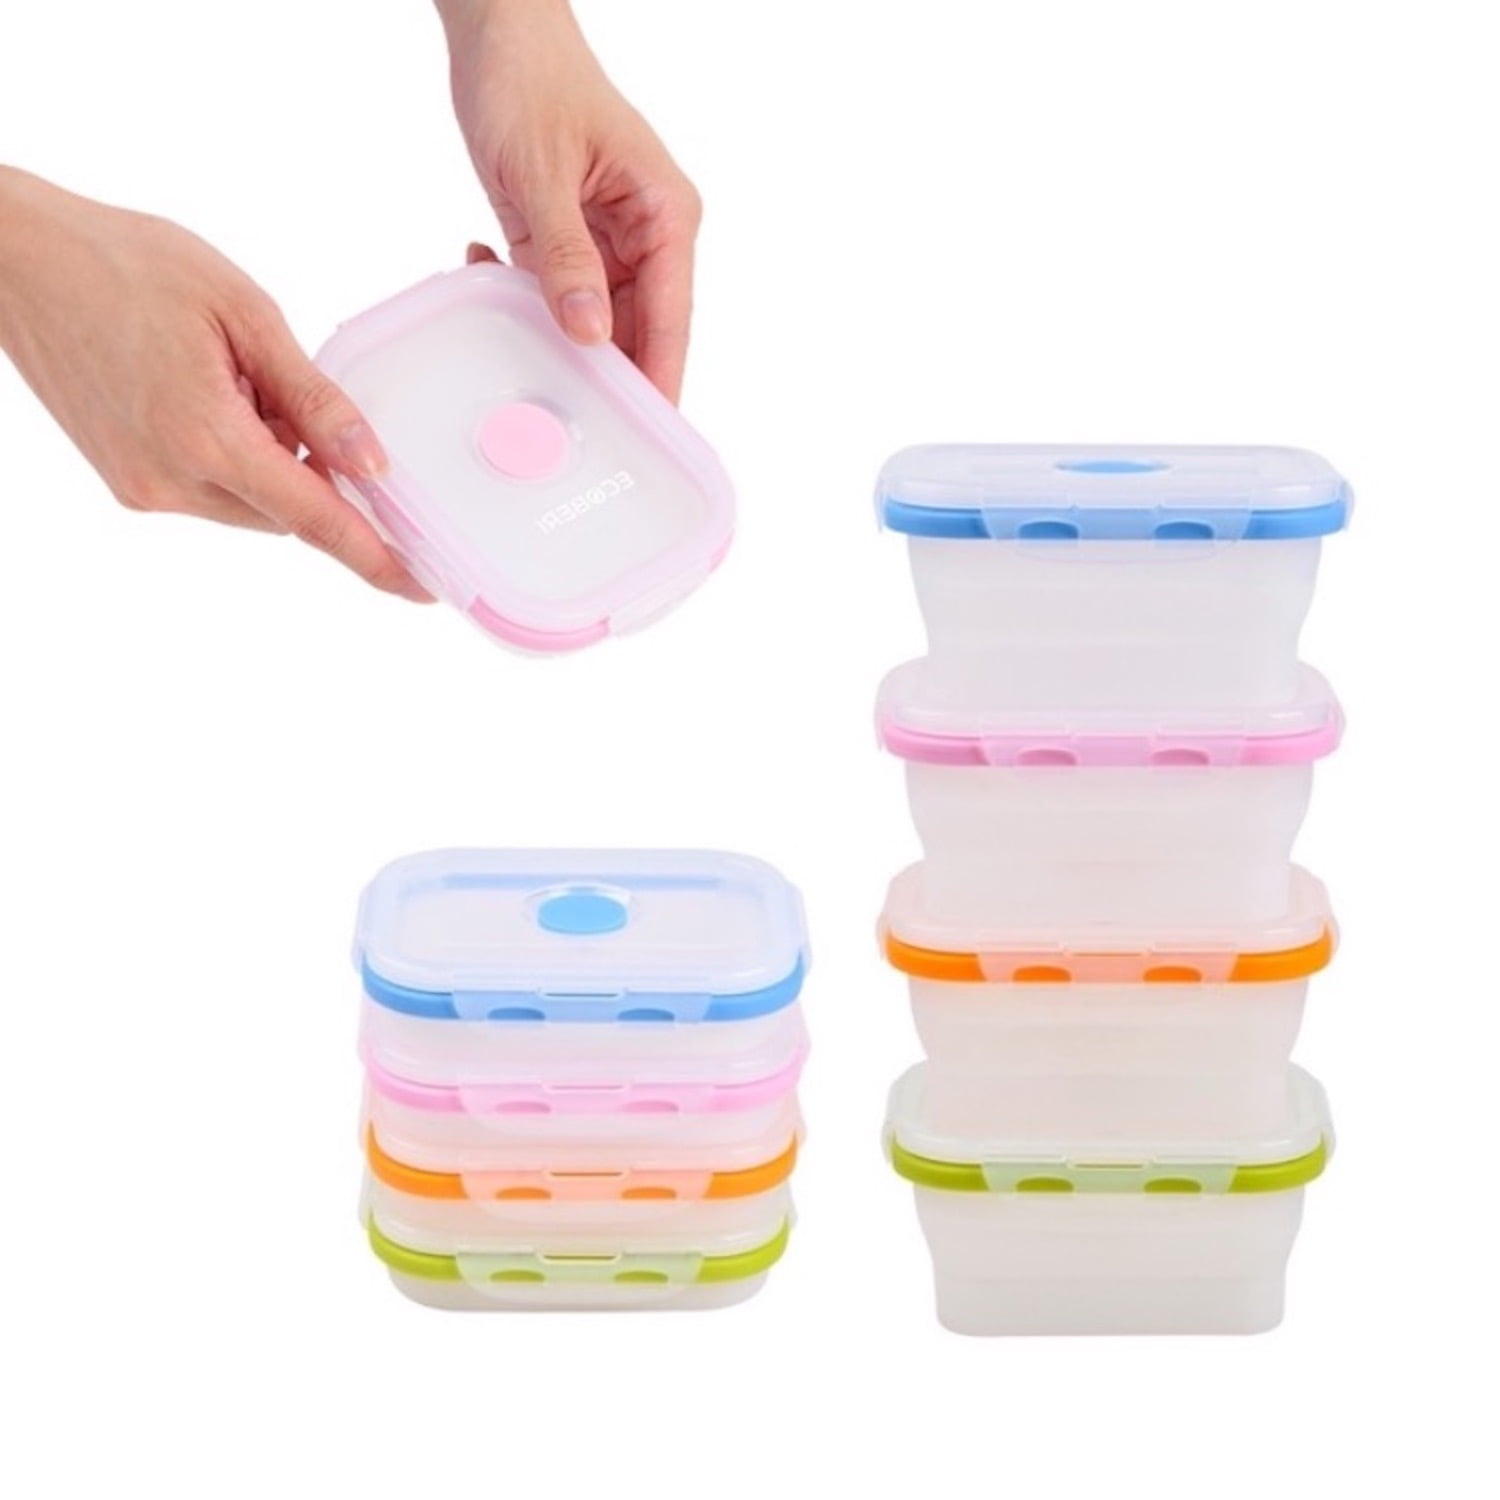 Set of 14 + 4 airtight storage containers for $22+ (Reg. $19-59+)